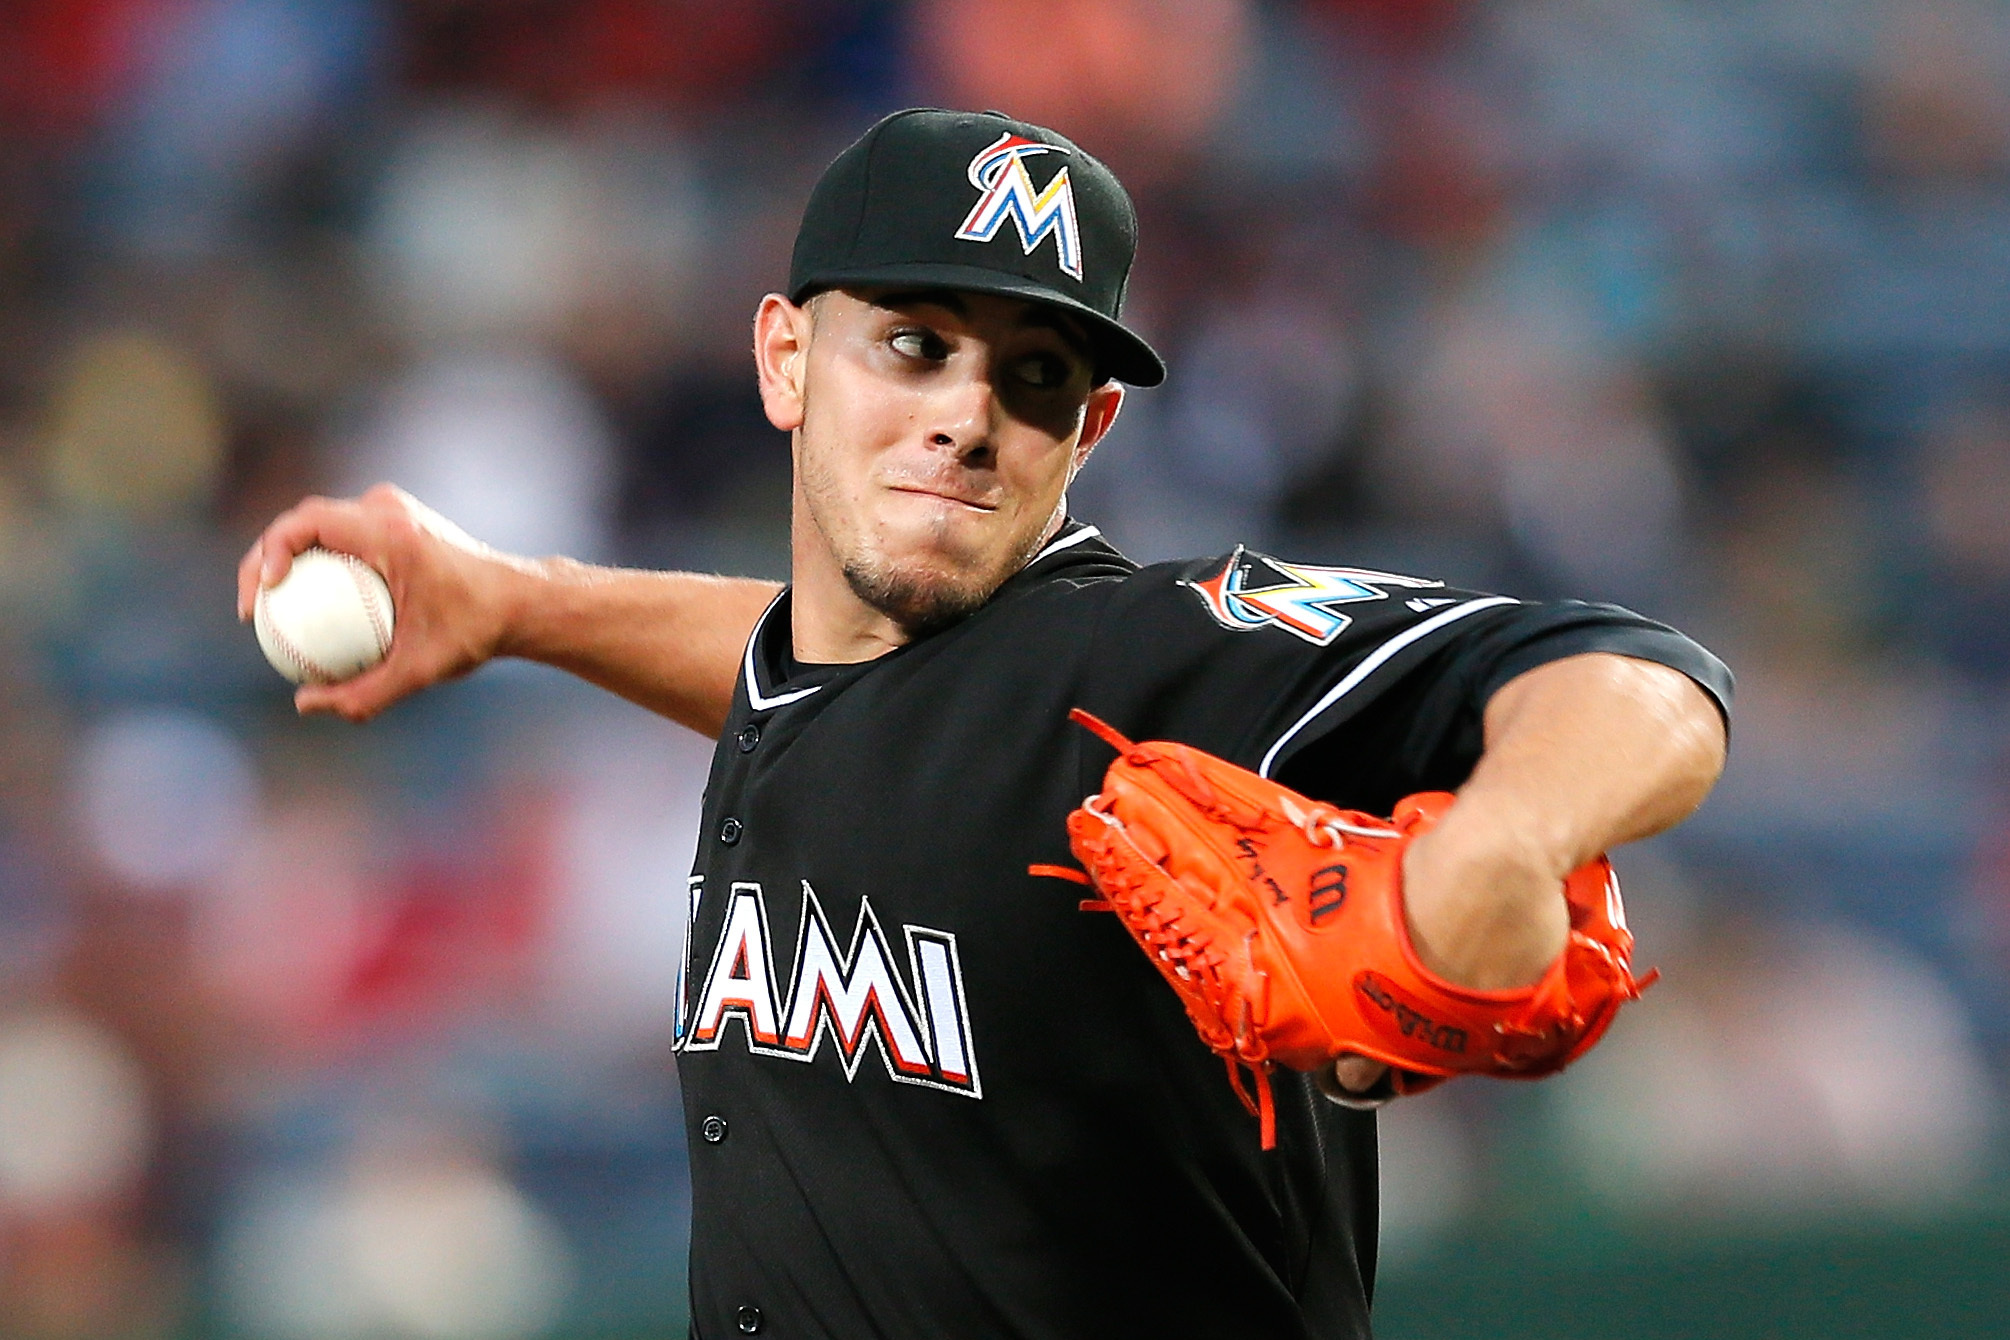 Giants' Kevin Gausman latest MLB All-Star from LSU, which has